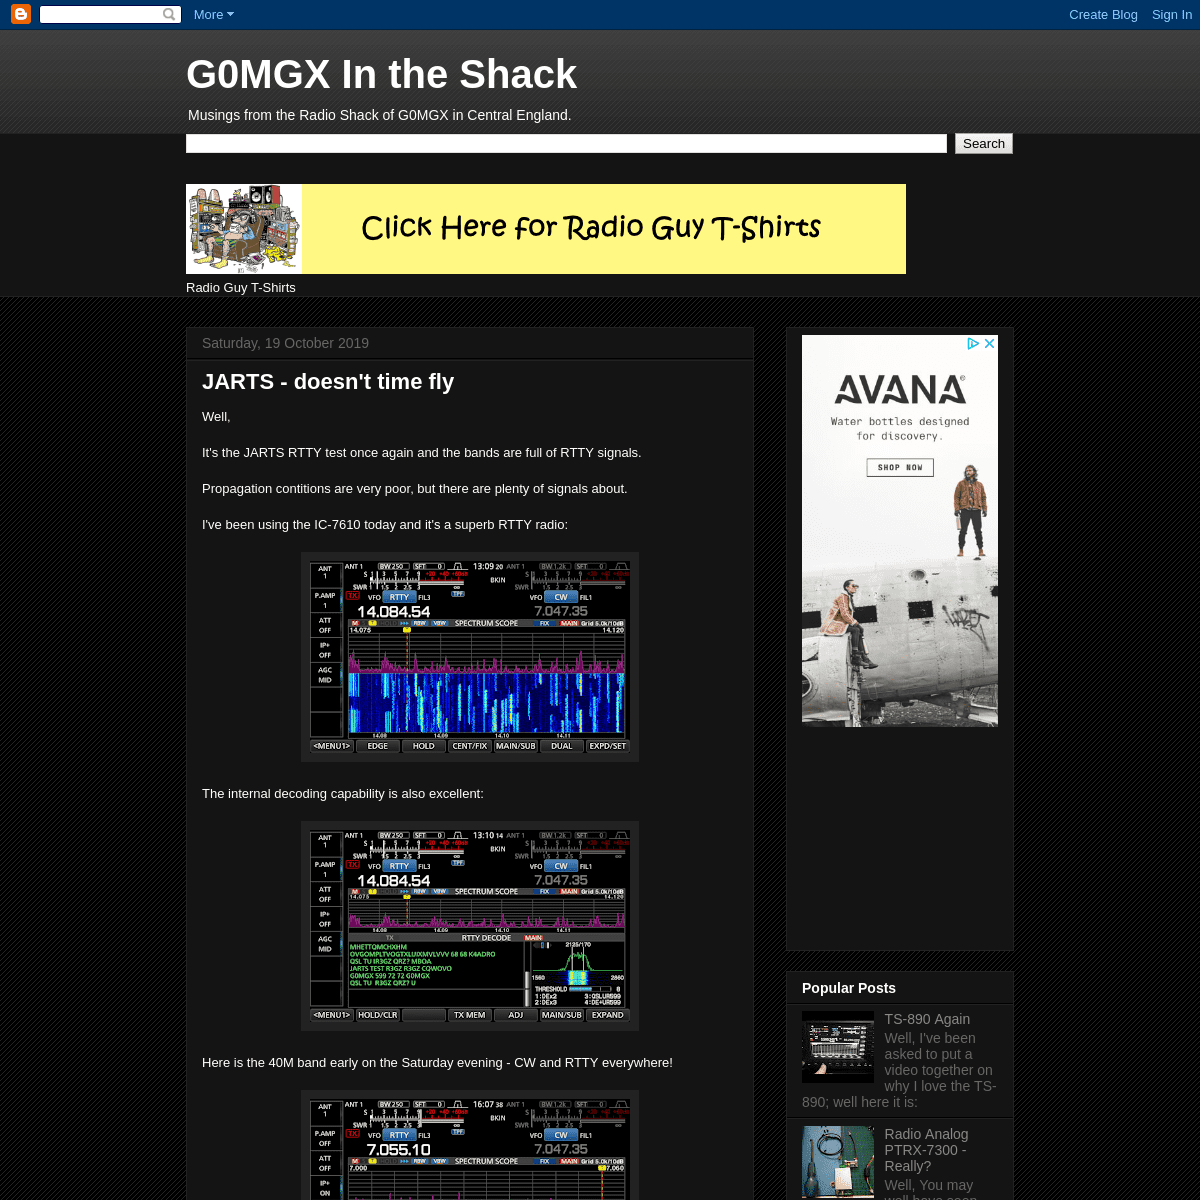 A complete backup of g0mgx.blogspot.com